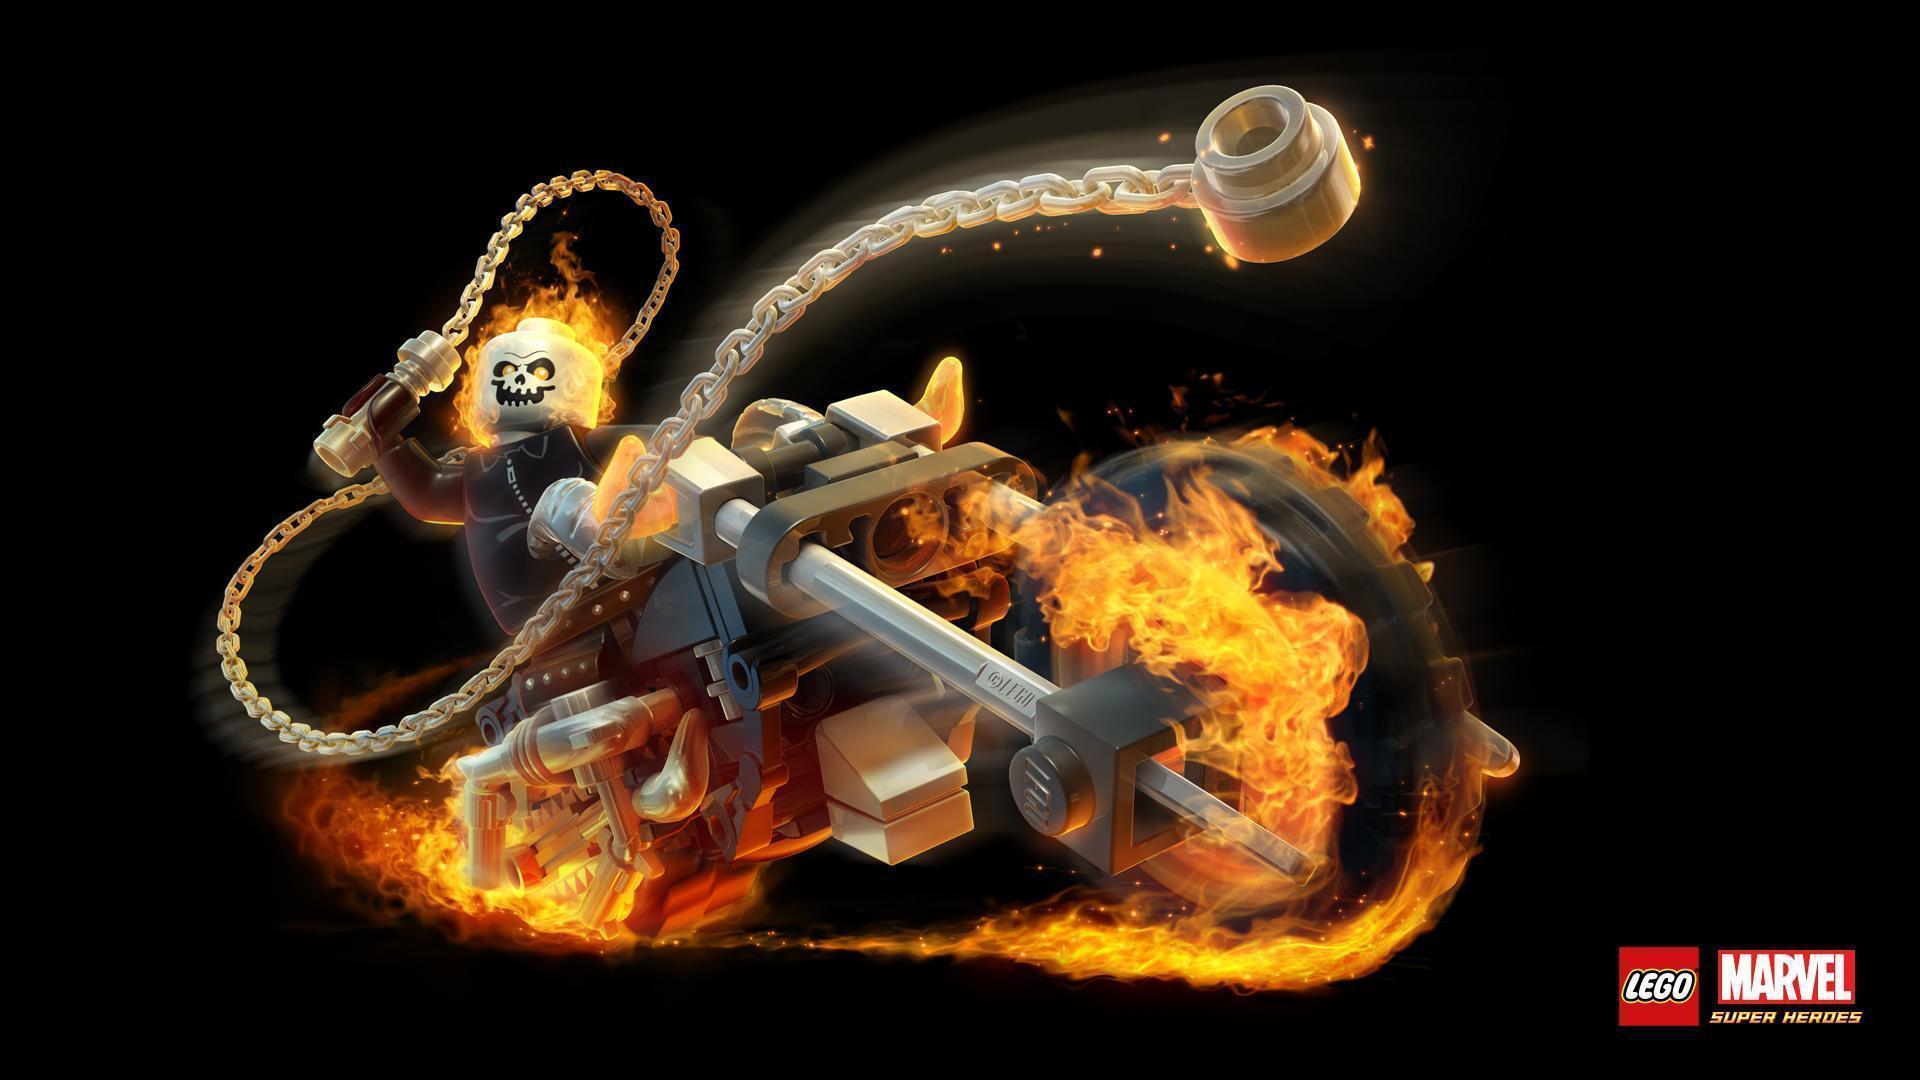 Lego Marvel Ghost Rider Set and Minifigure coming in 2016